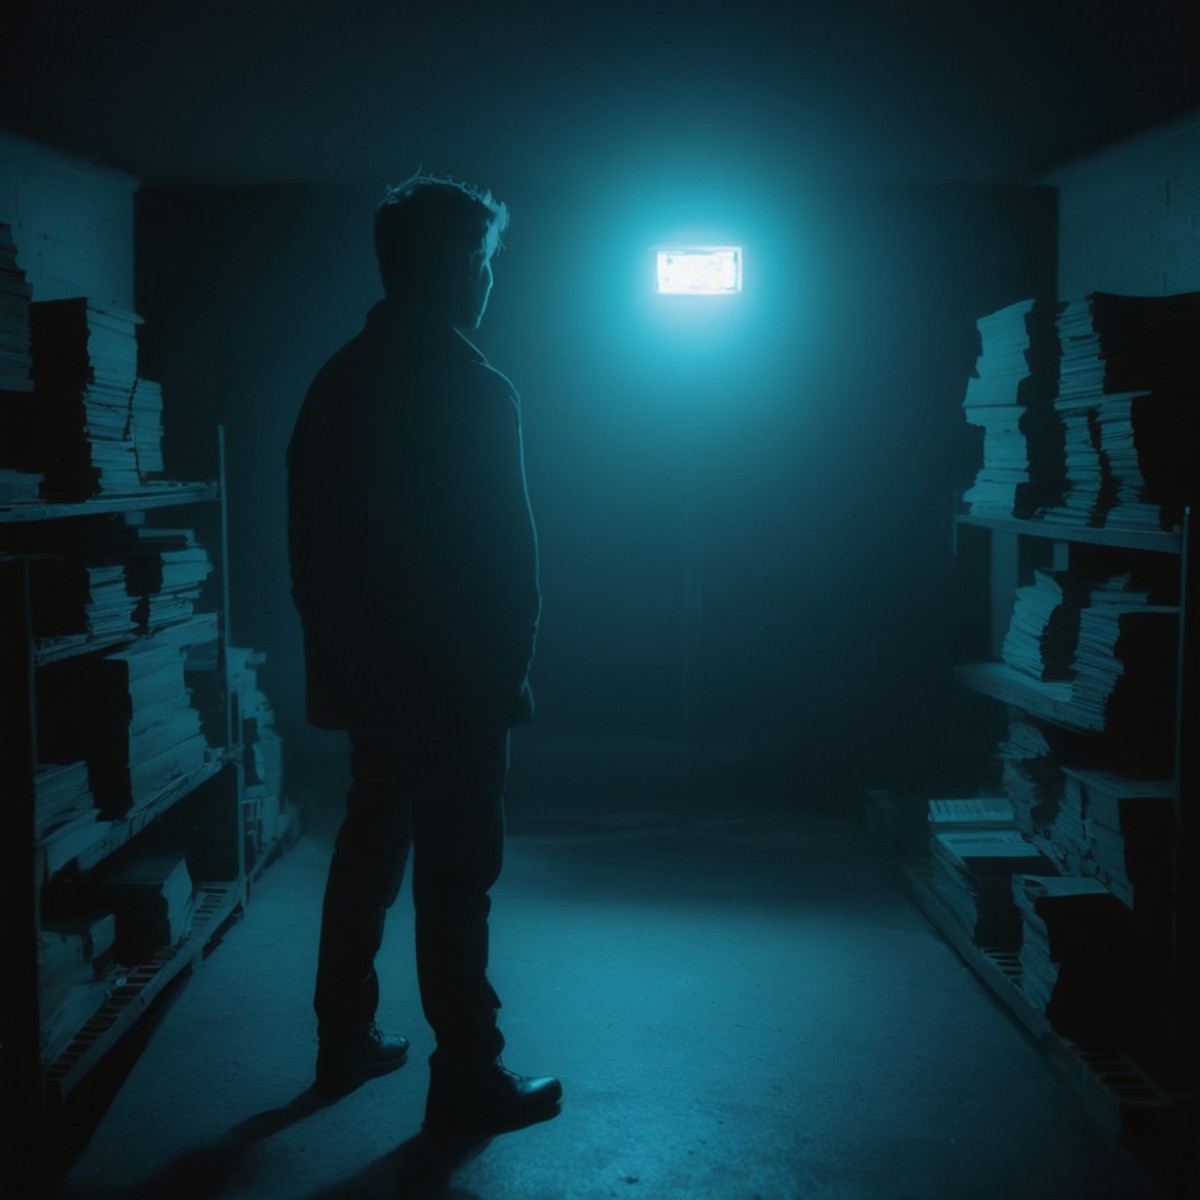 cinematic film still of  <lora:diffused light style:1>
A Diffused light of a man standing in a dark room with neon lights,...